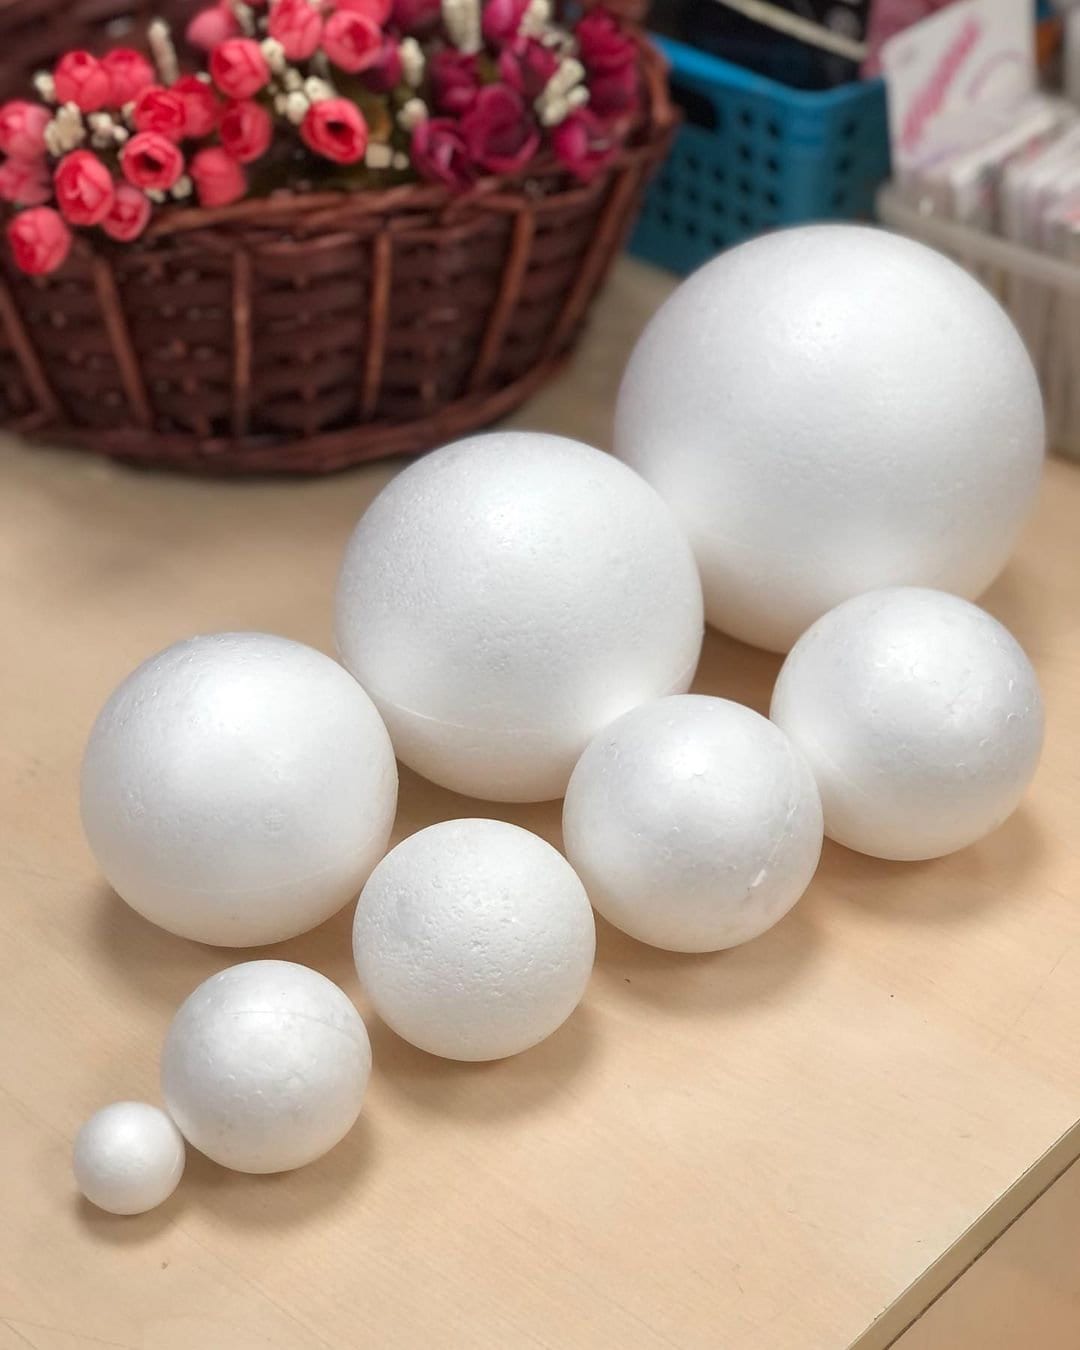 DIYASY 8 Large White Foam Balls 2 Pack Giant Foam Balls Smooth Solid Craft Balls for Christmas DIY Ornaments. 8 inch 2pcs